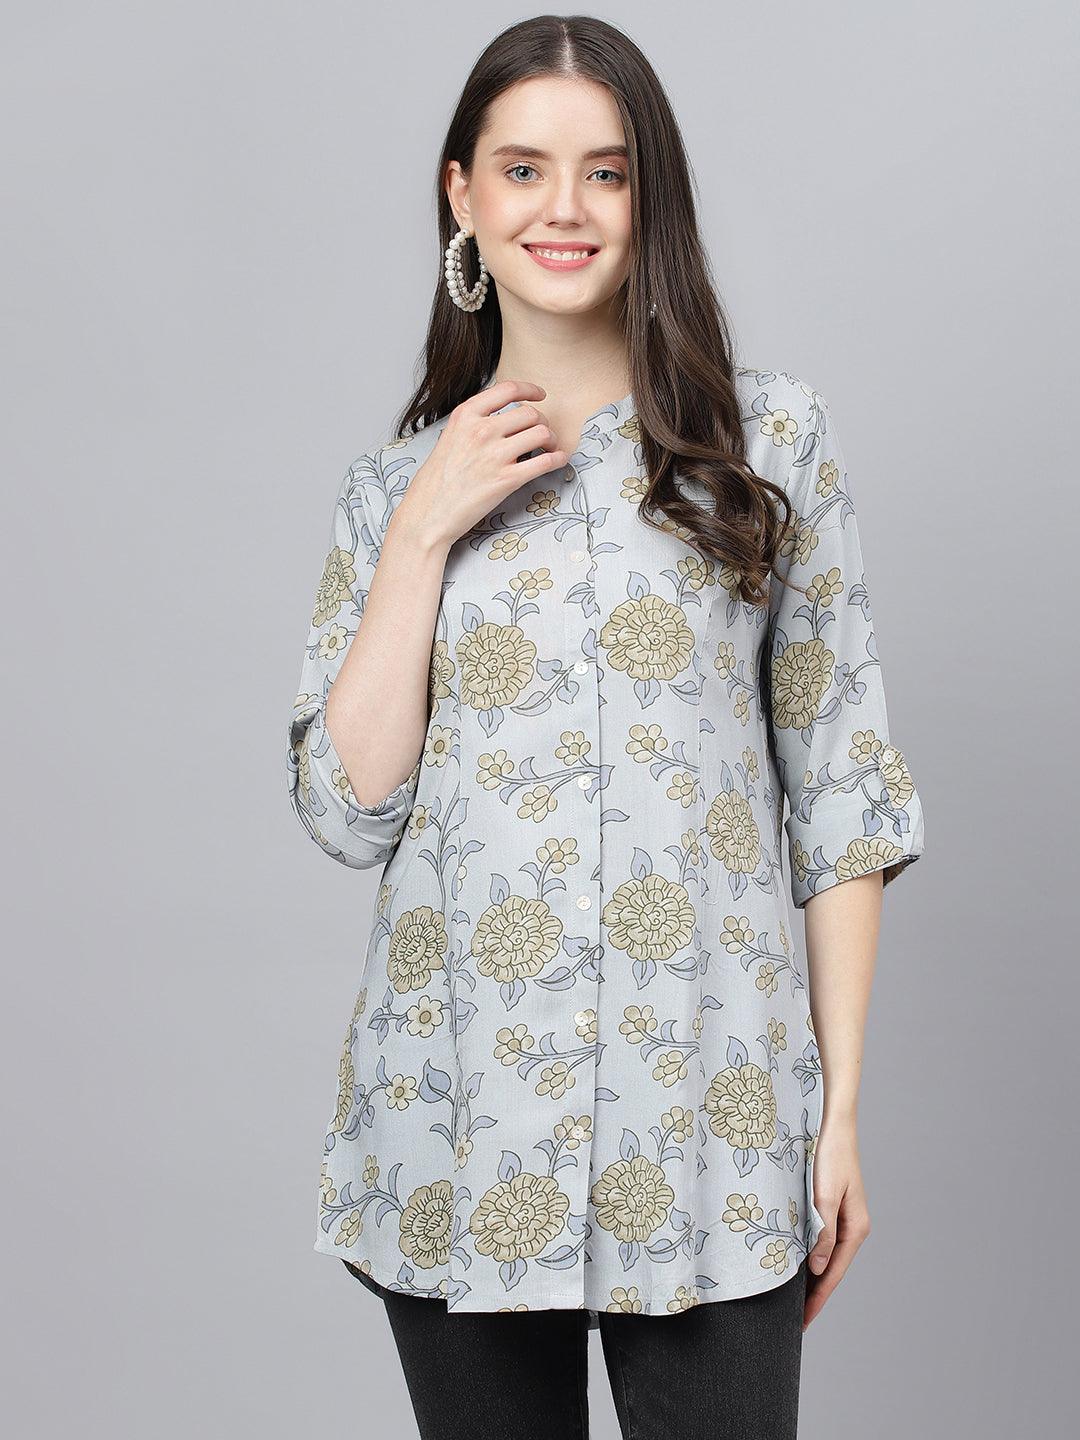 Divena Dusty Blue Floral printed Rayon A-line Shirts Style Top - divena world